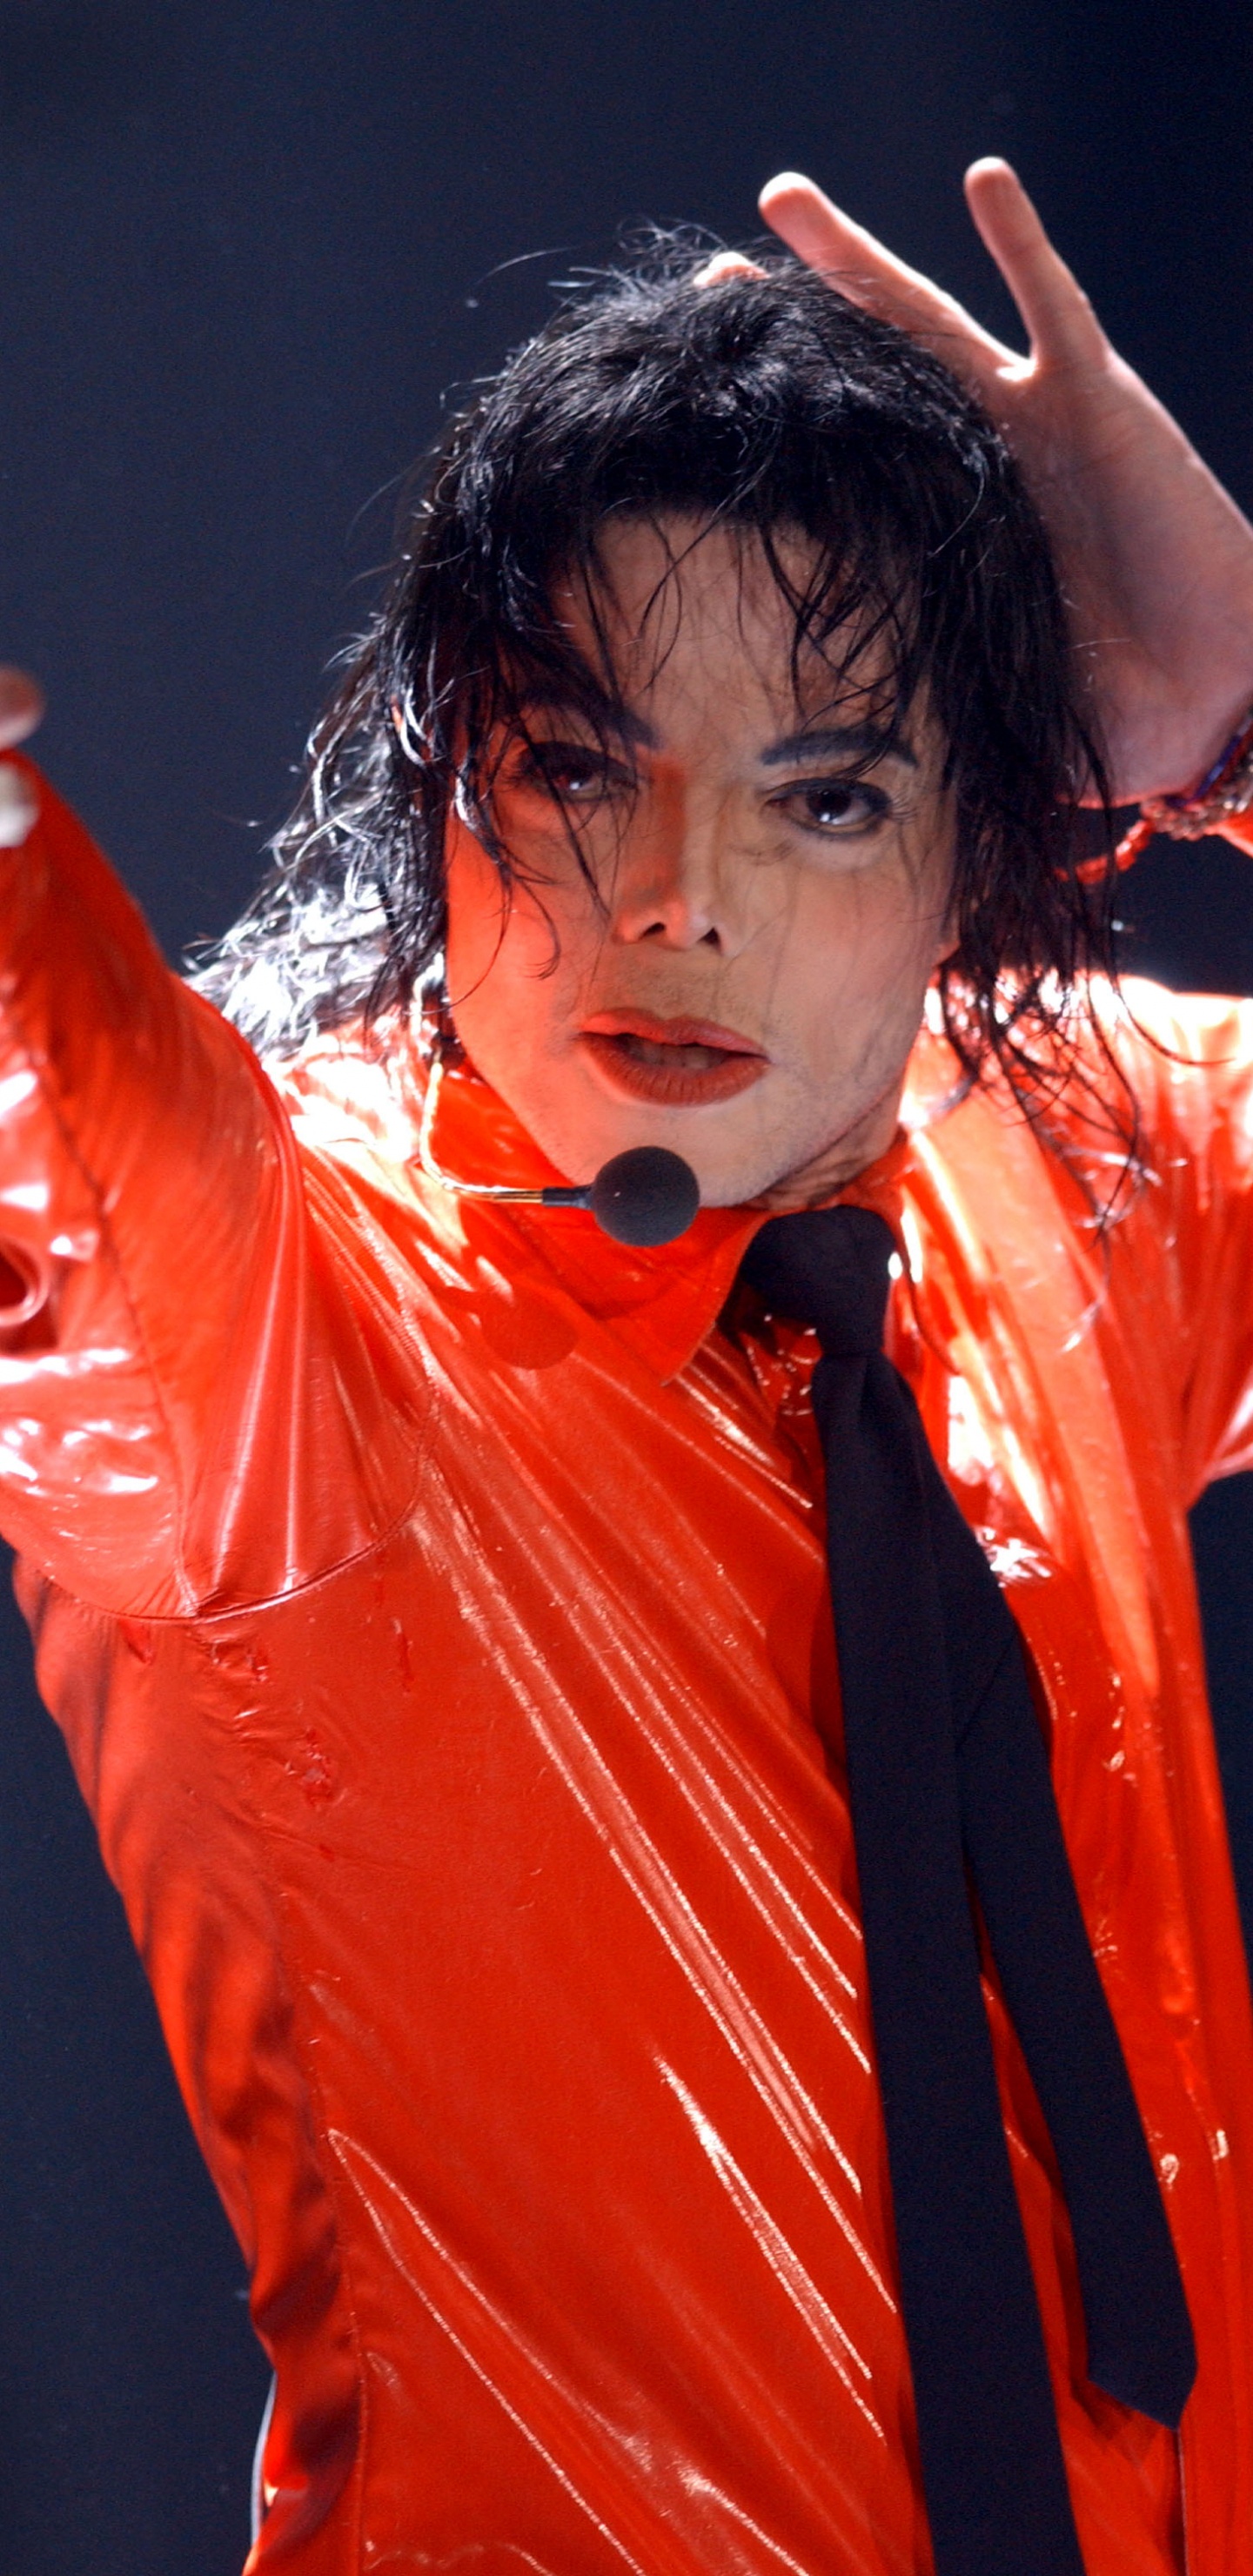 Michael Jackson, Performance, Red, Performing Arts, Singer. Wallpaper in 1440x2960 Resolution